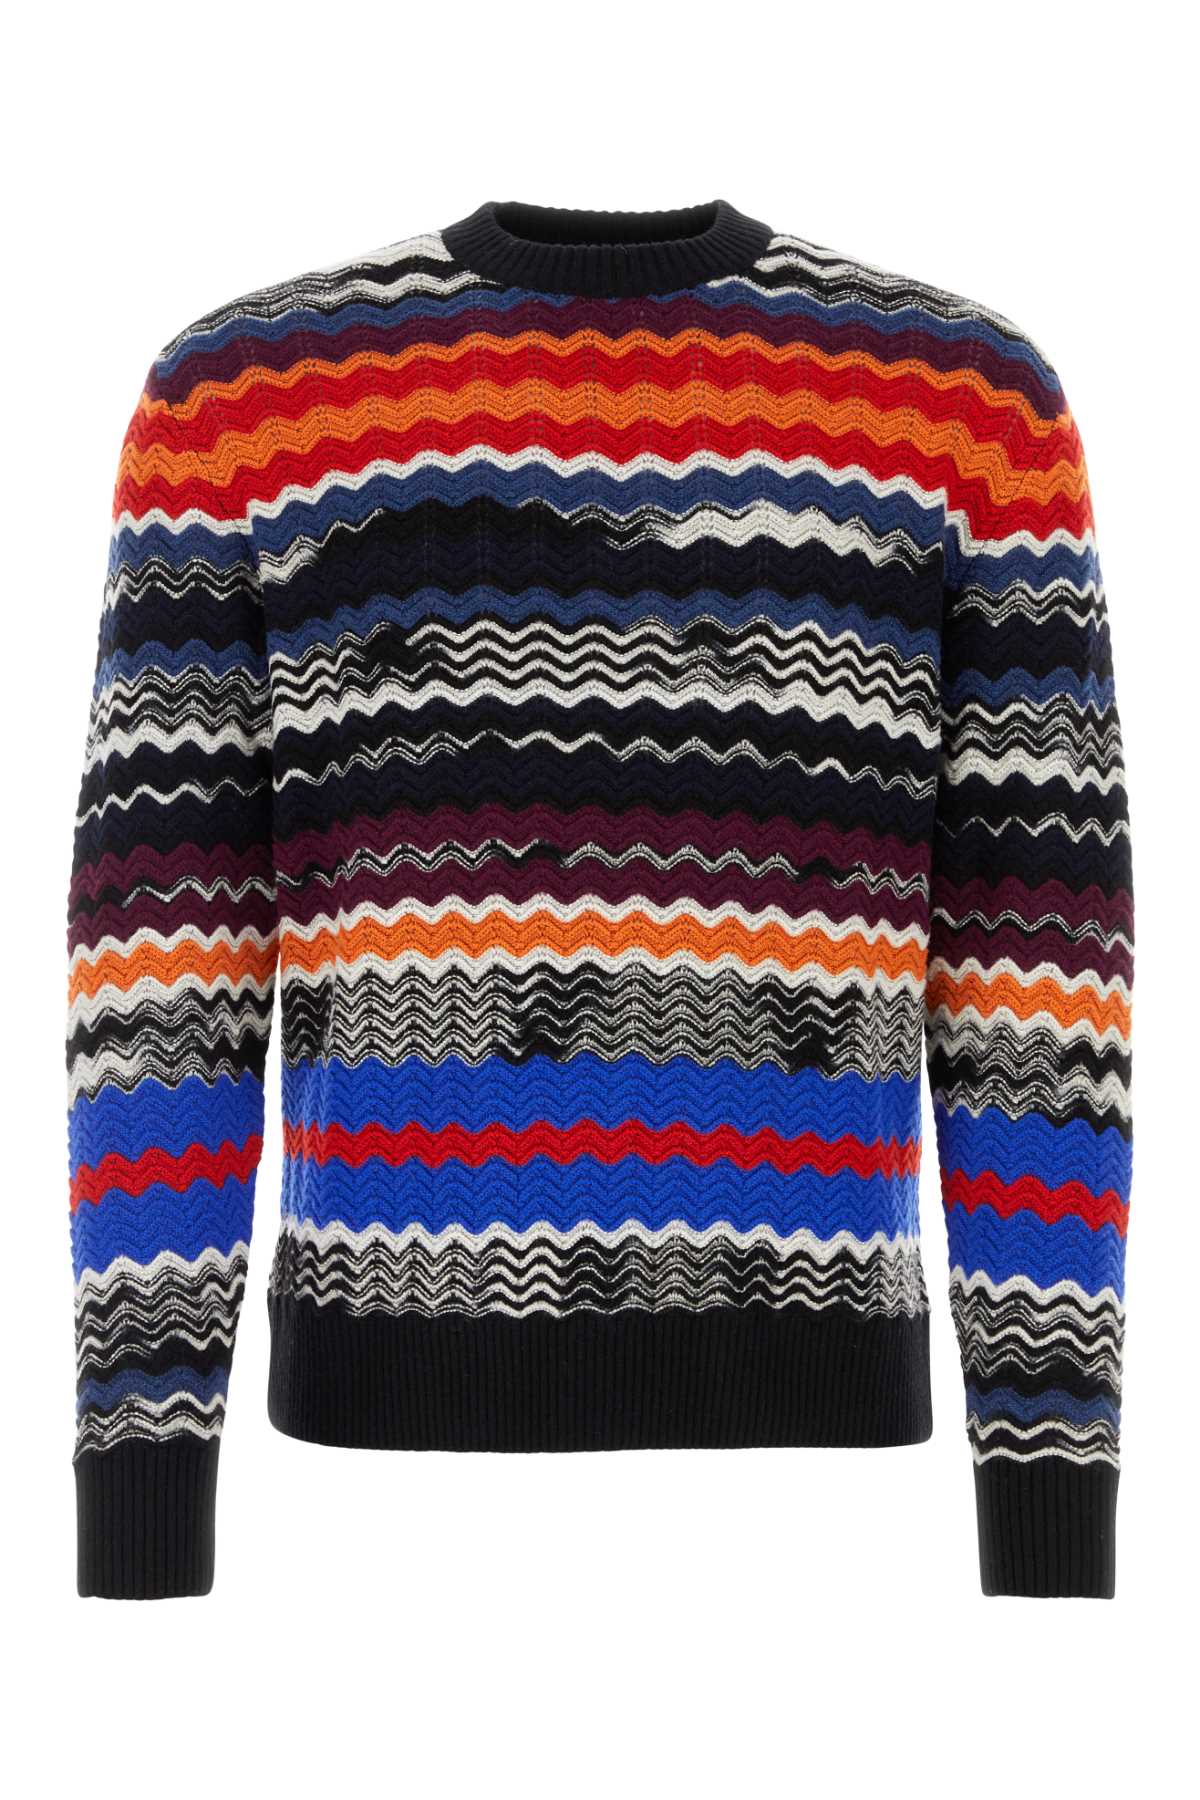 Missoni Embroidered Stretch Wool Blend Sweater